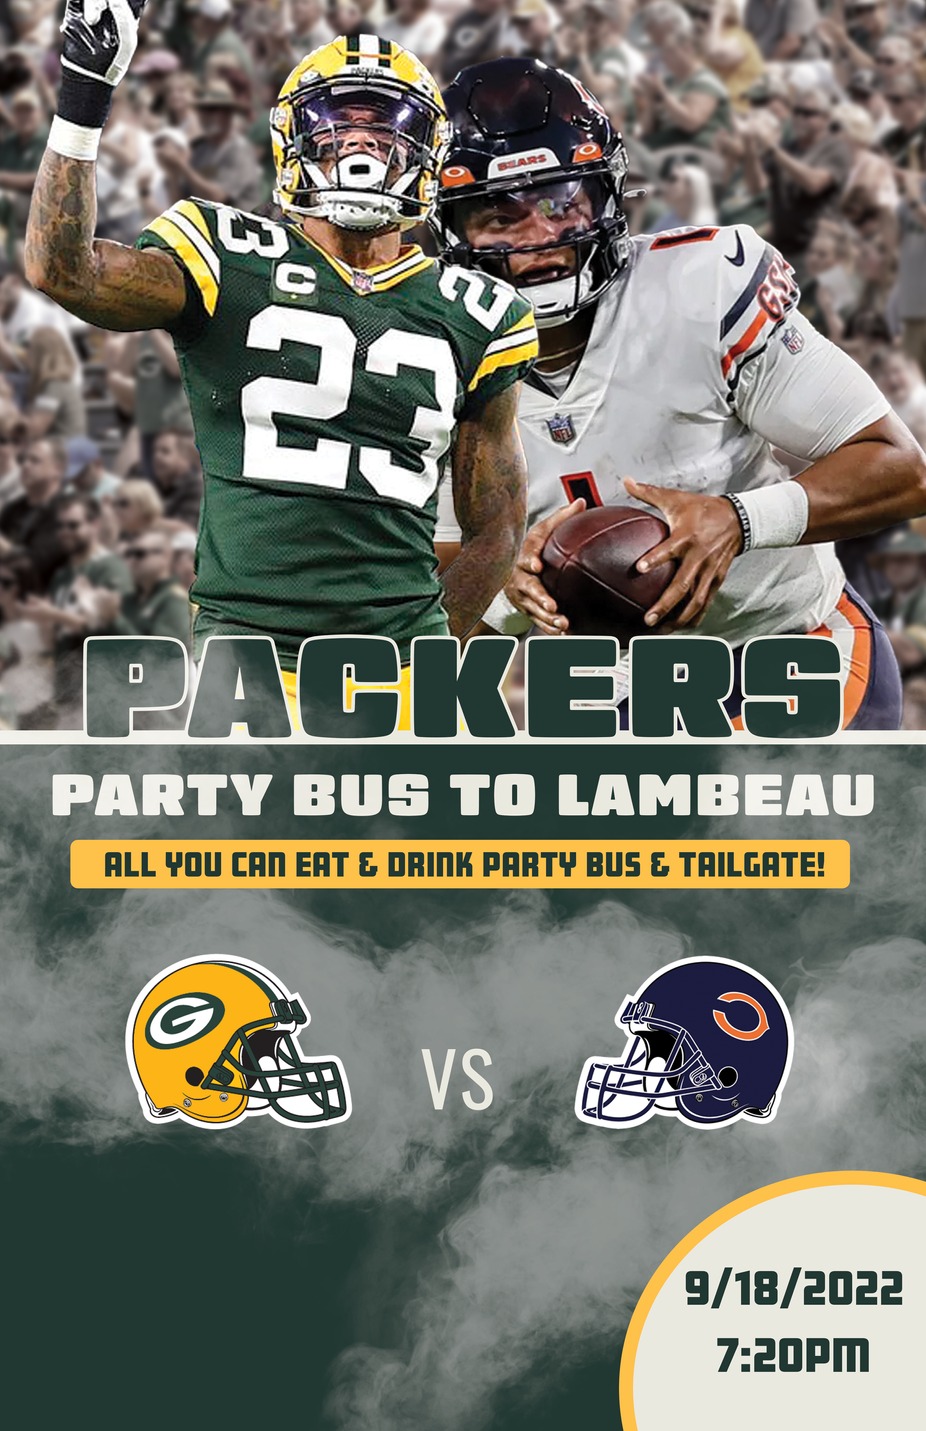 Packers Vs. Bears Party Bus to Lambeau event photo